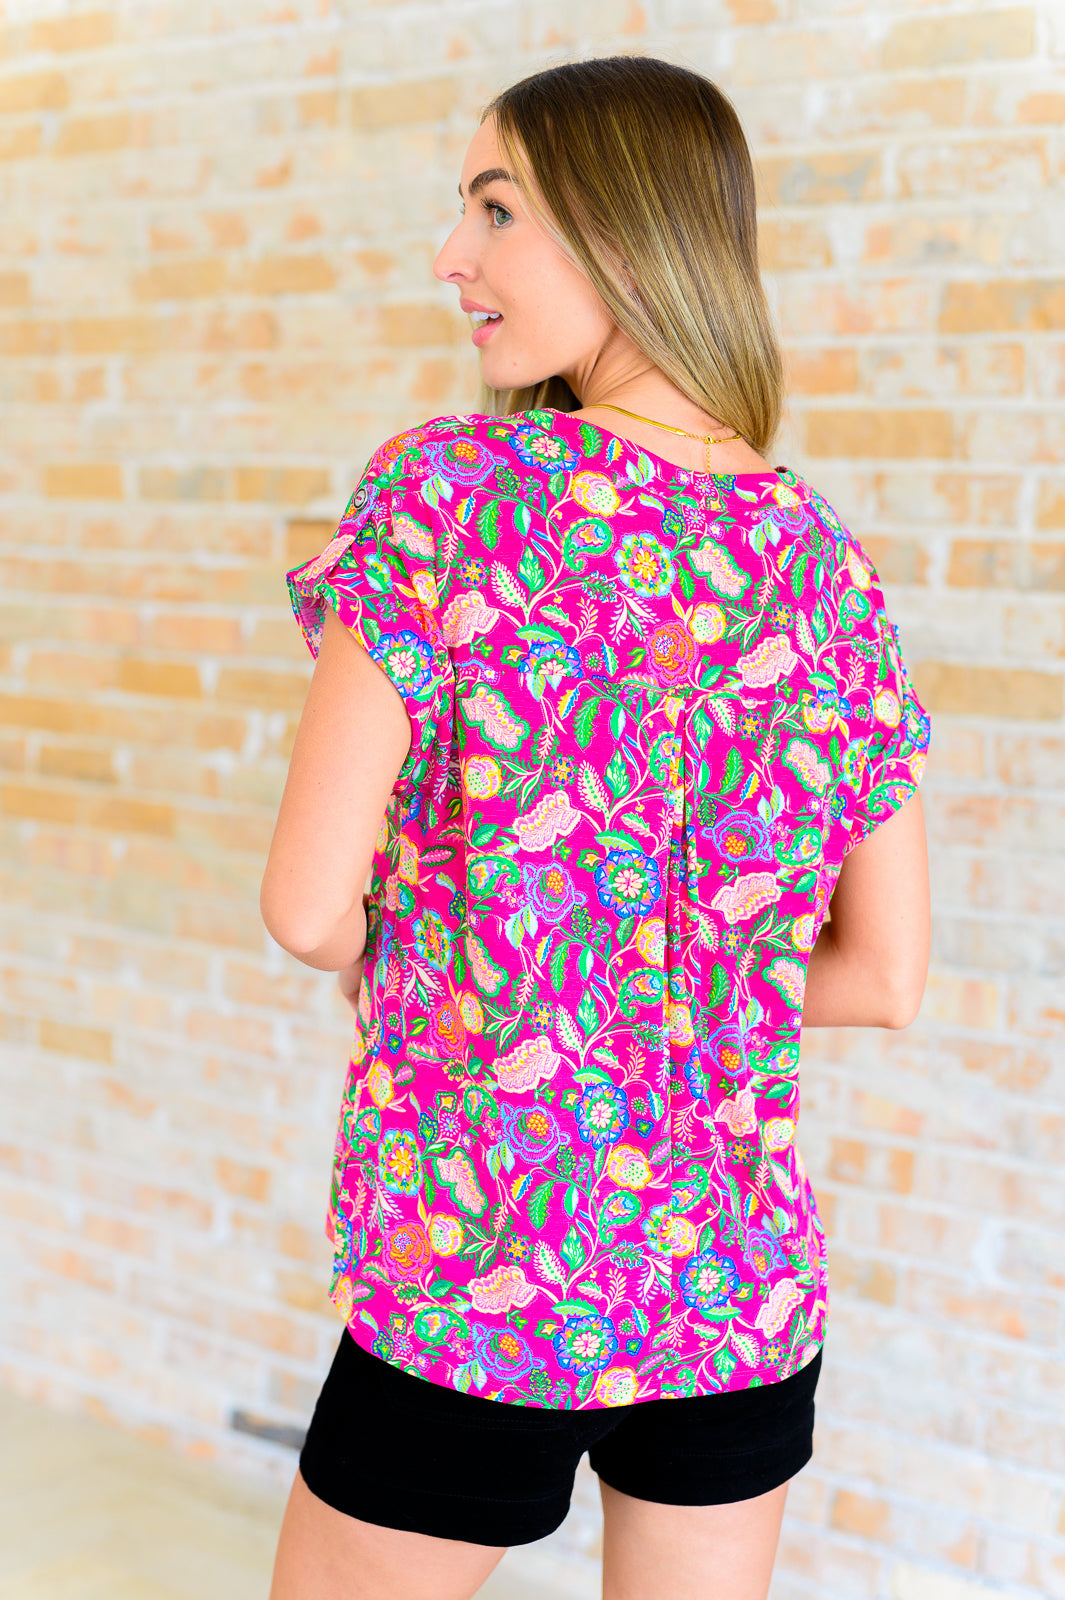 Lizzy Cap Sleeve Top in Fuchsia and Green Floral Paisley